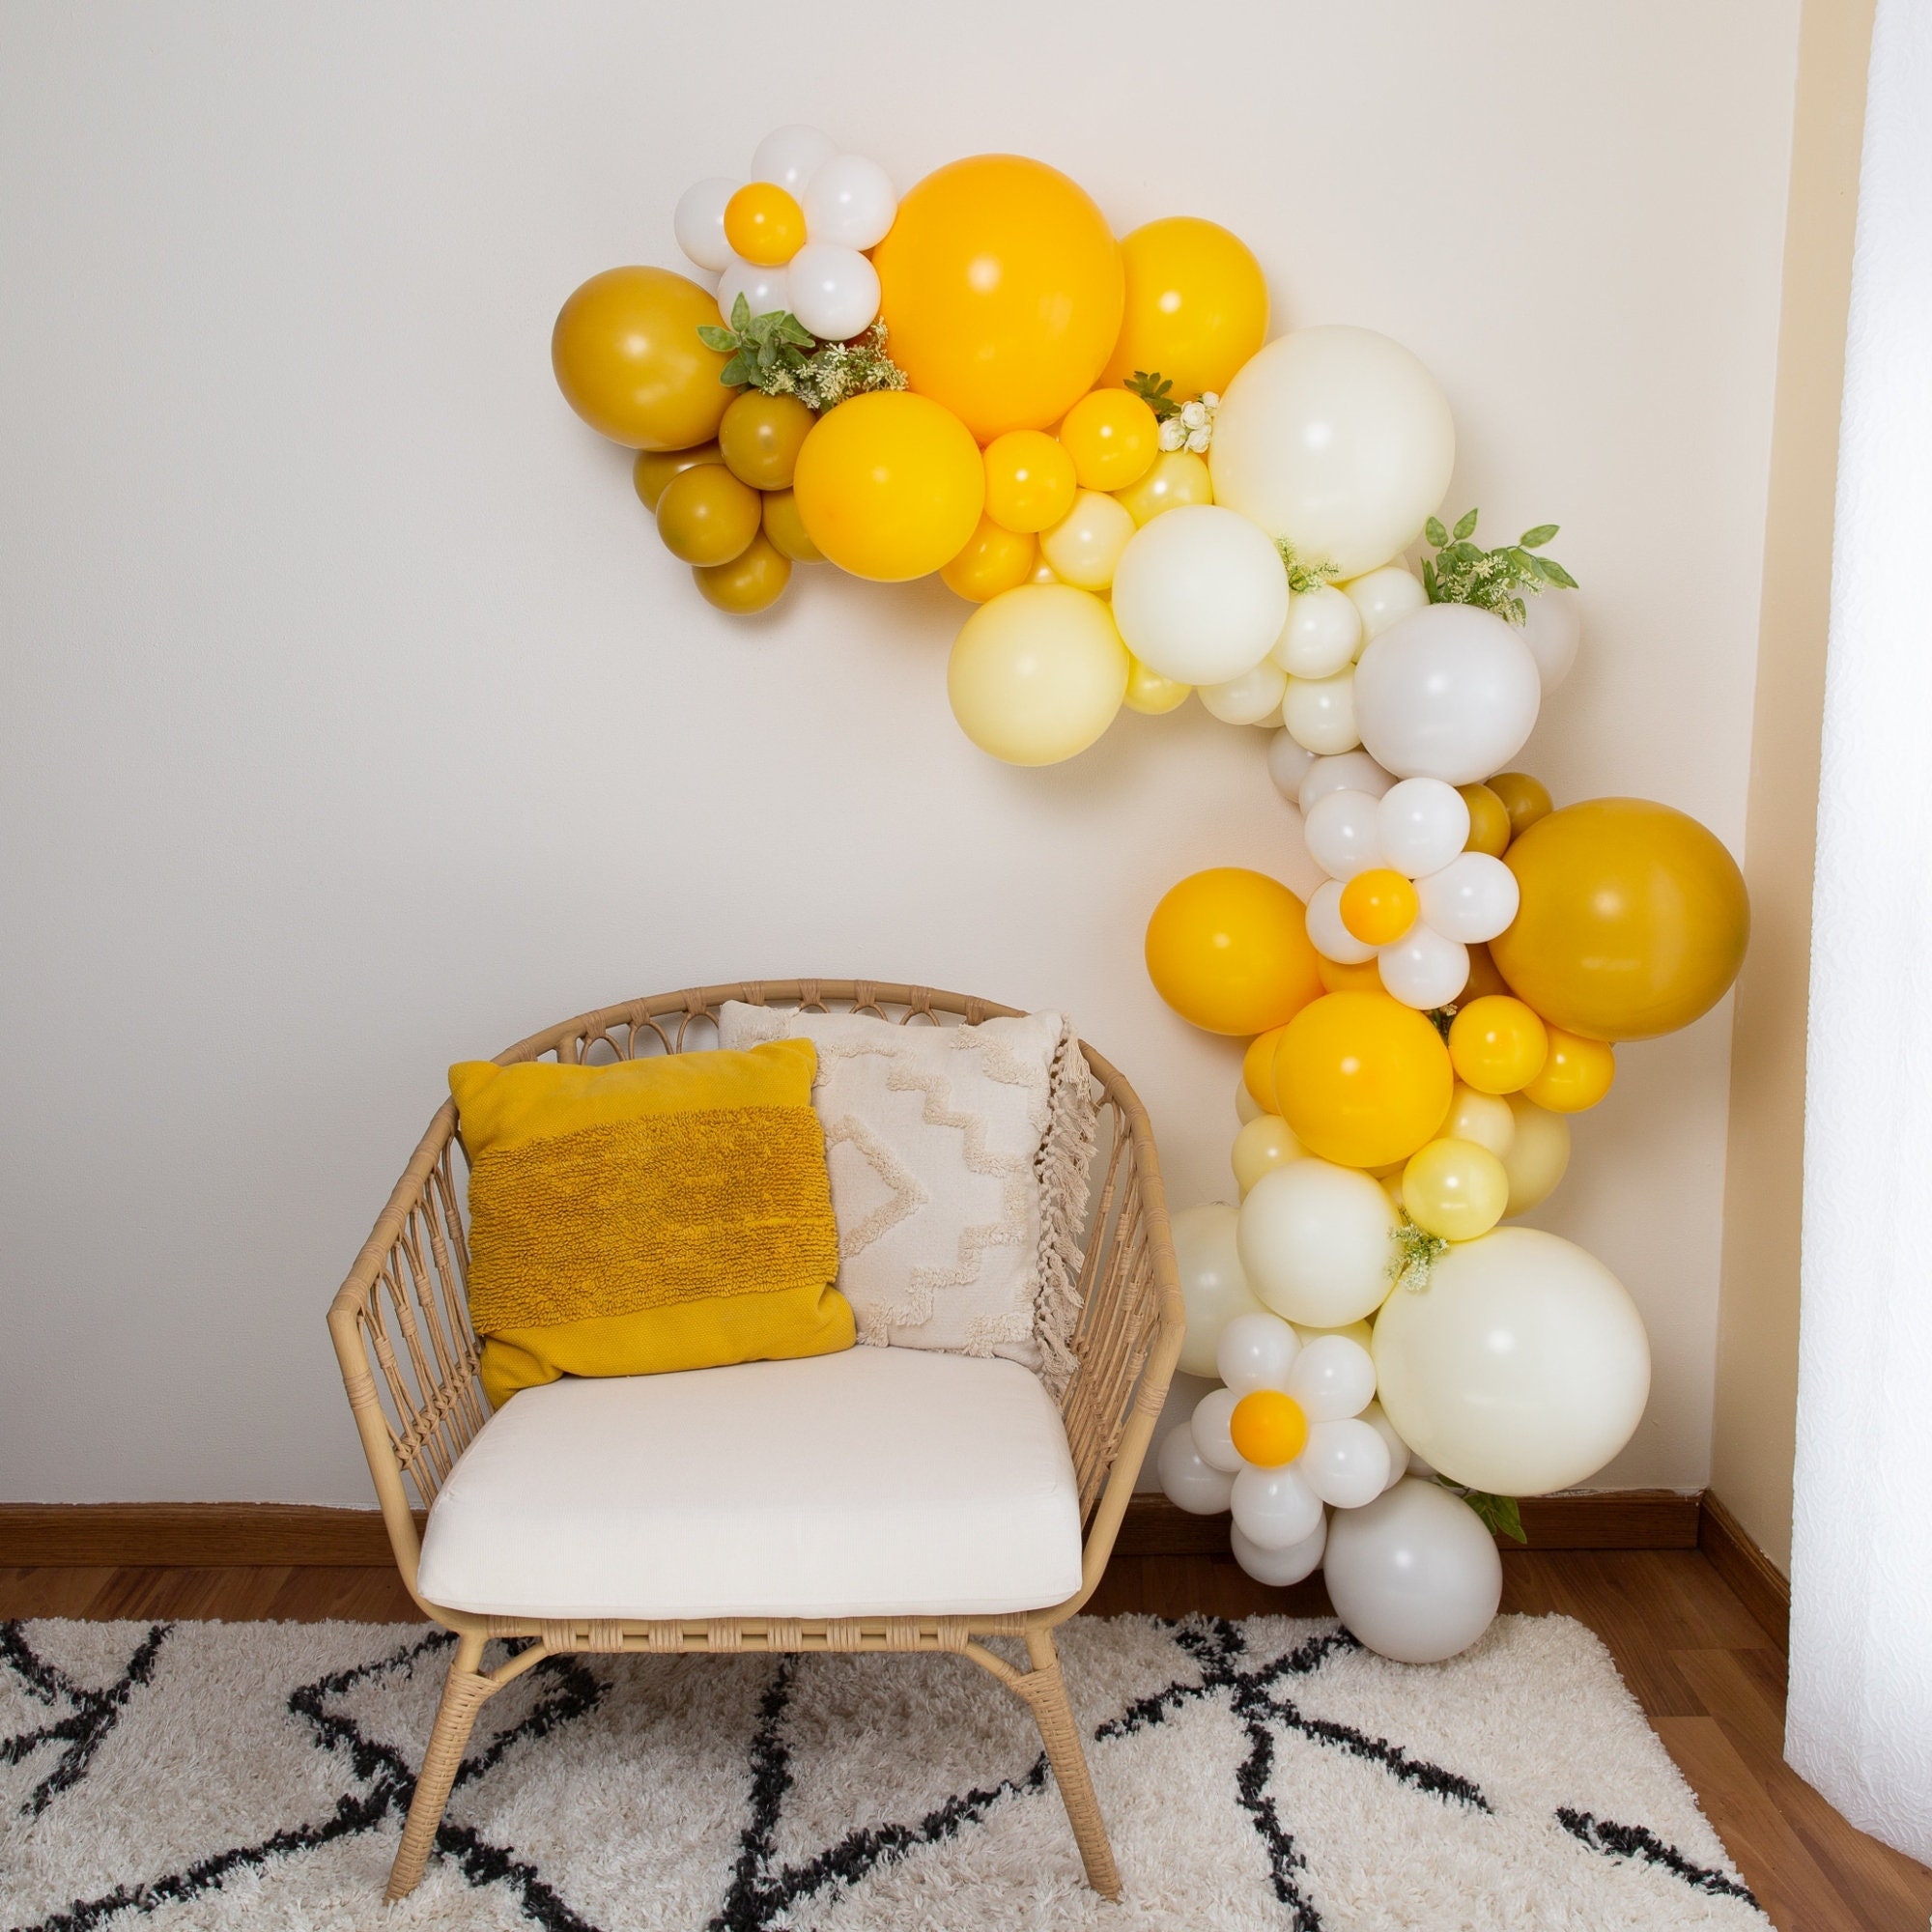 Lemon Bumble Bee Baby Shower Decor Decorations with Honey Yellow Balloon  Garland Arch Kit